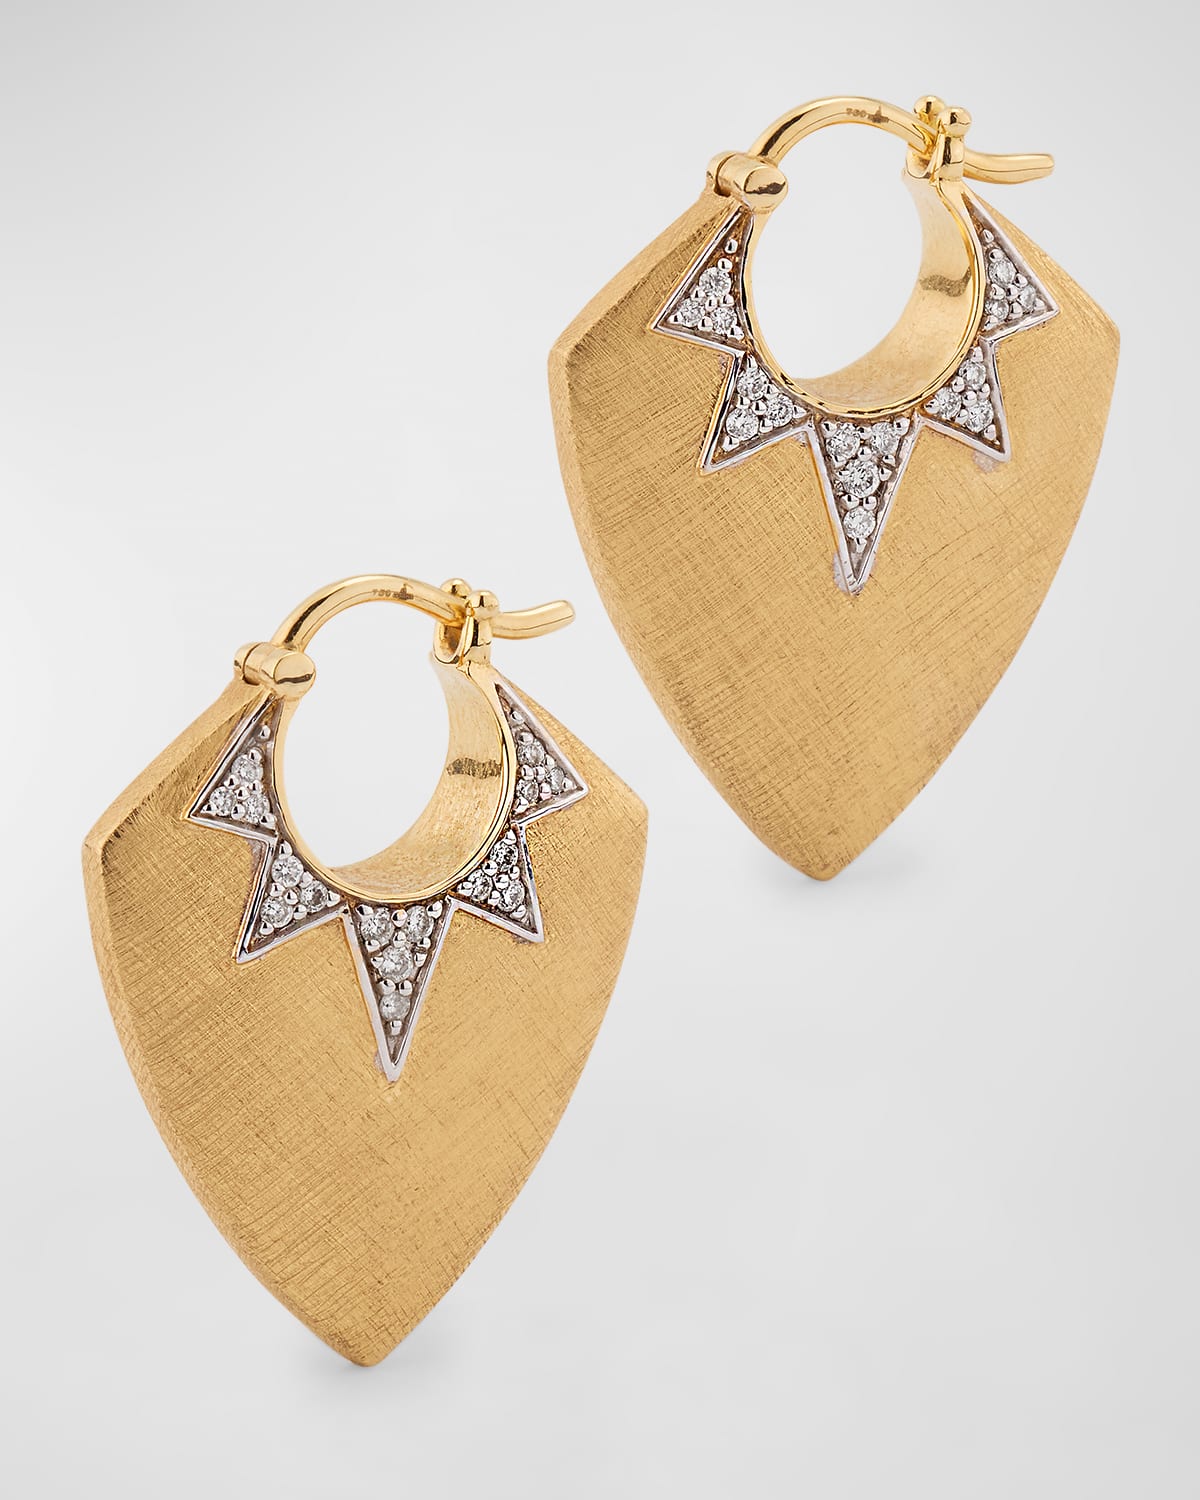 18K Yellow Gold Florentine Earrings with White Rhodium over GH-SI Diamonds.